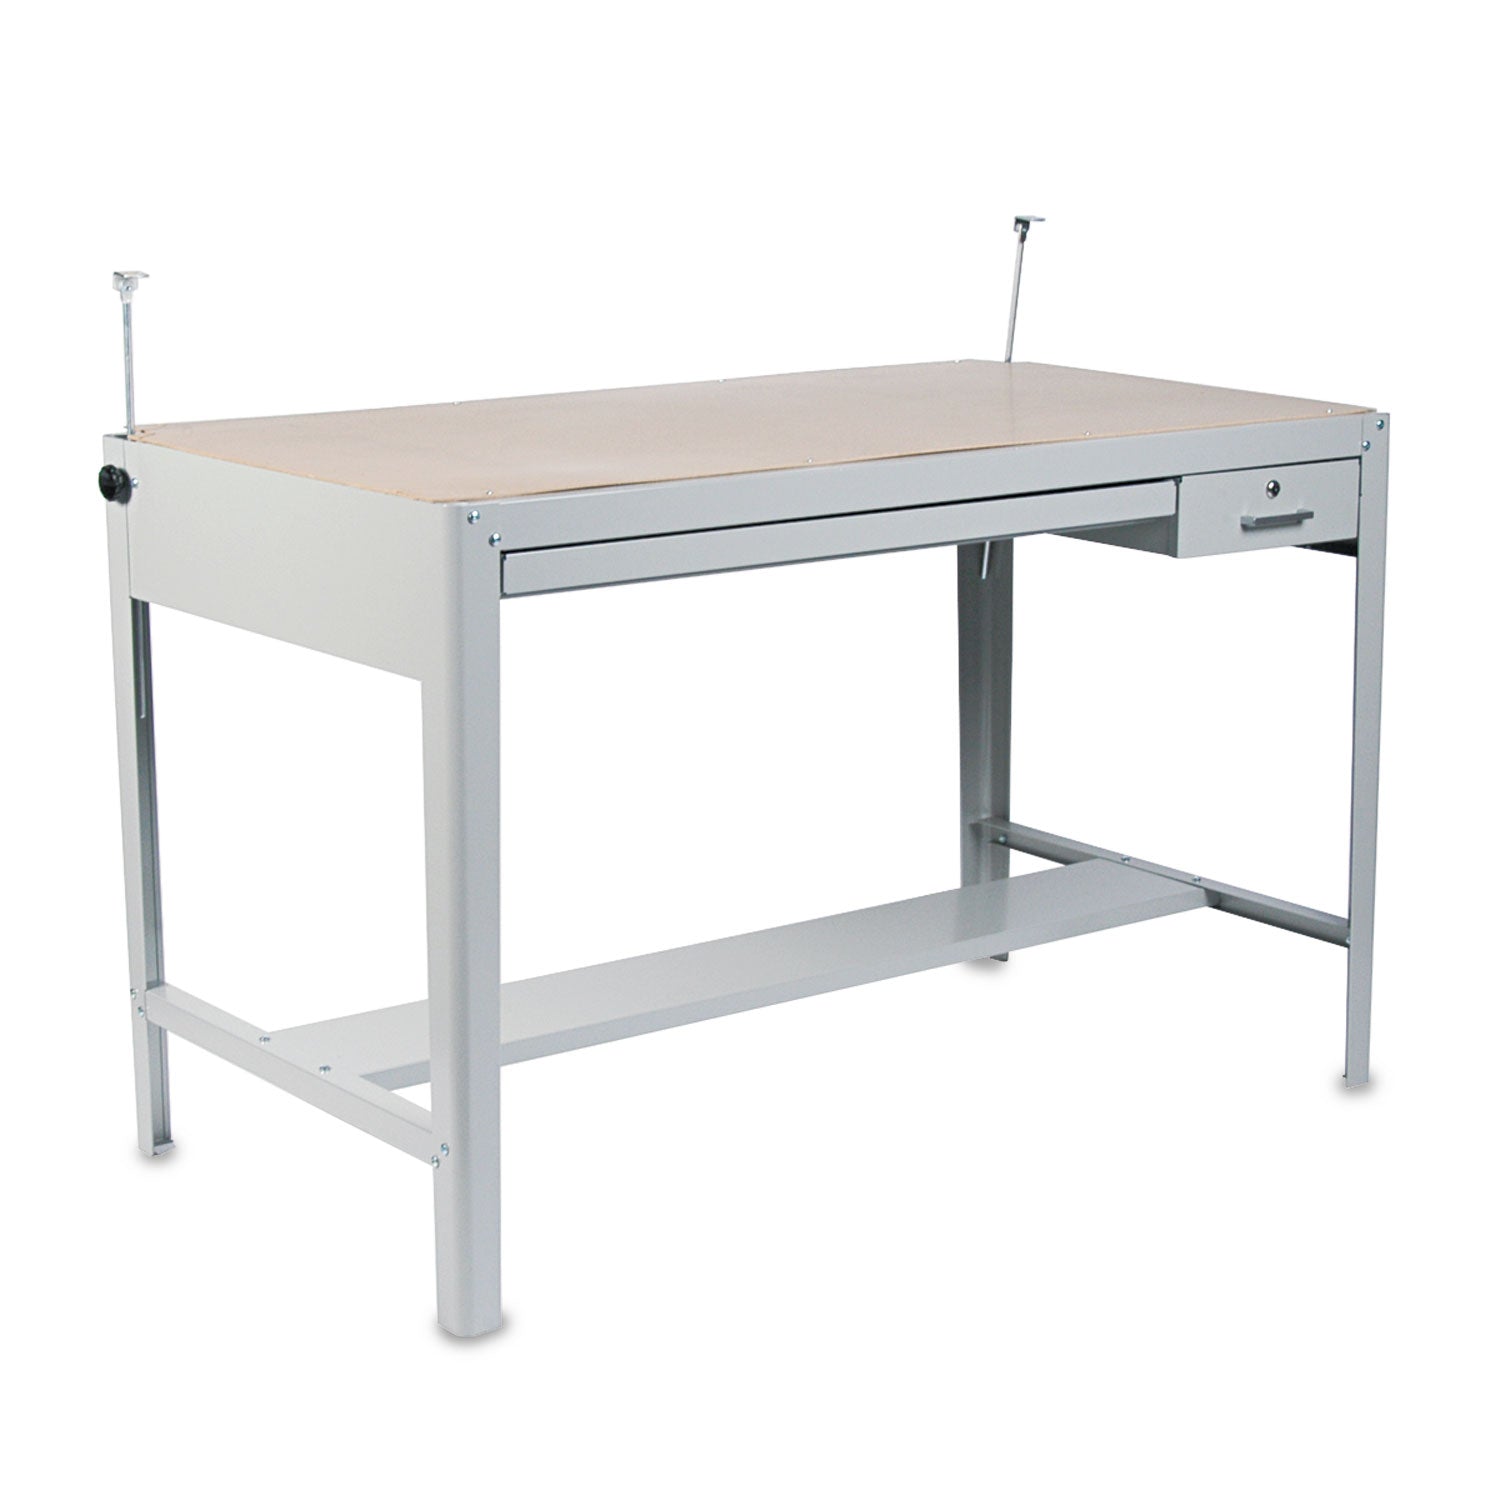 Precision Four-Post Drafting Table Base, 56.5w x 30.5d x 35.5h, Gray - 